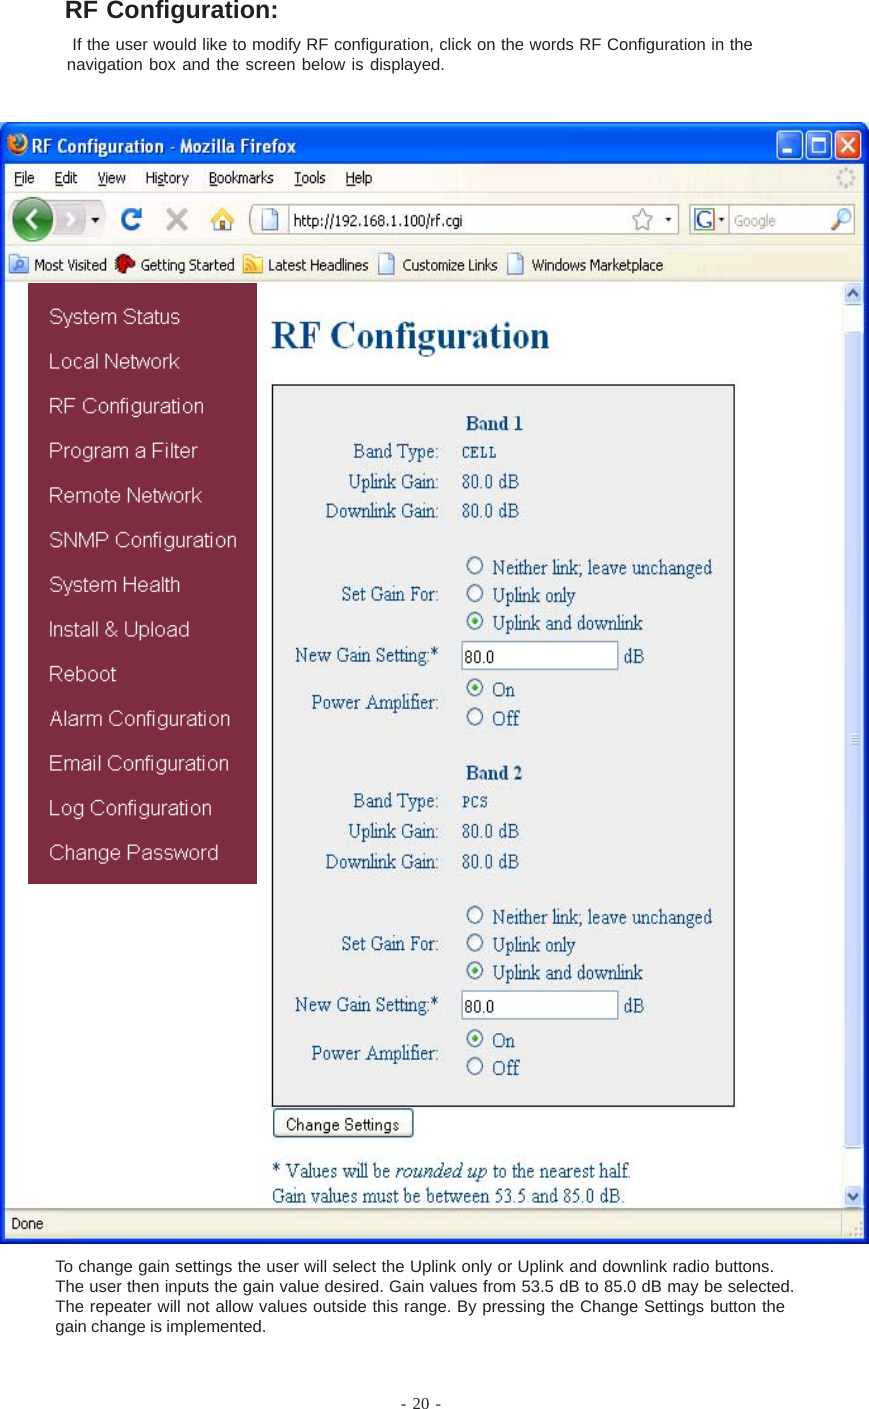 - 20 - If the user would like to modify RF configuration, click on the words RF Configuration in thenavigation box and the screen below is displayed.To change gain settings the user will select the Uplink only or Uplink and downlink radio buttons.The user then inputs the gain value desired. Gain values from 53.5 dB to 85.0 dB may be selected.The repeater will not allow values outside this range. By pressing the Change Settings button thegain change is implemented.RF Configuration: